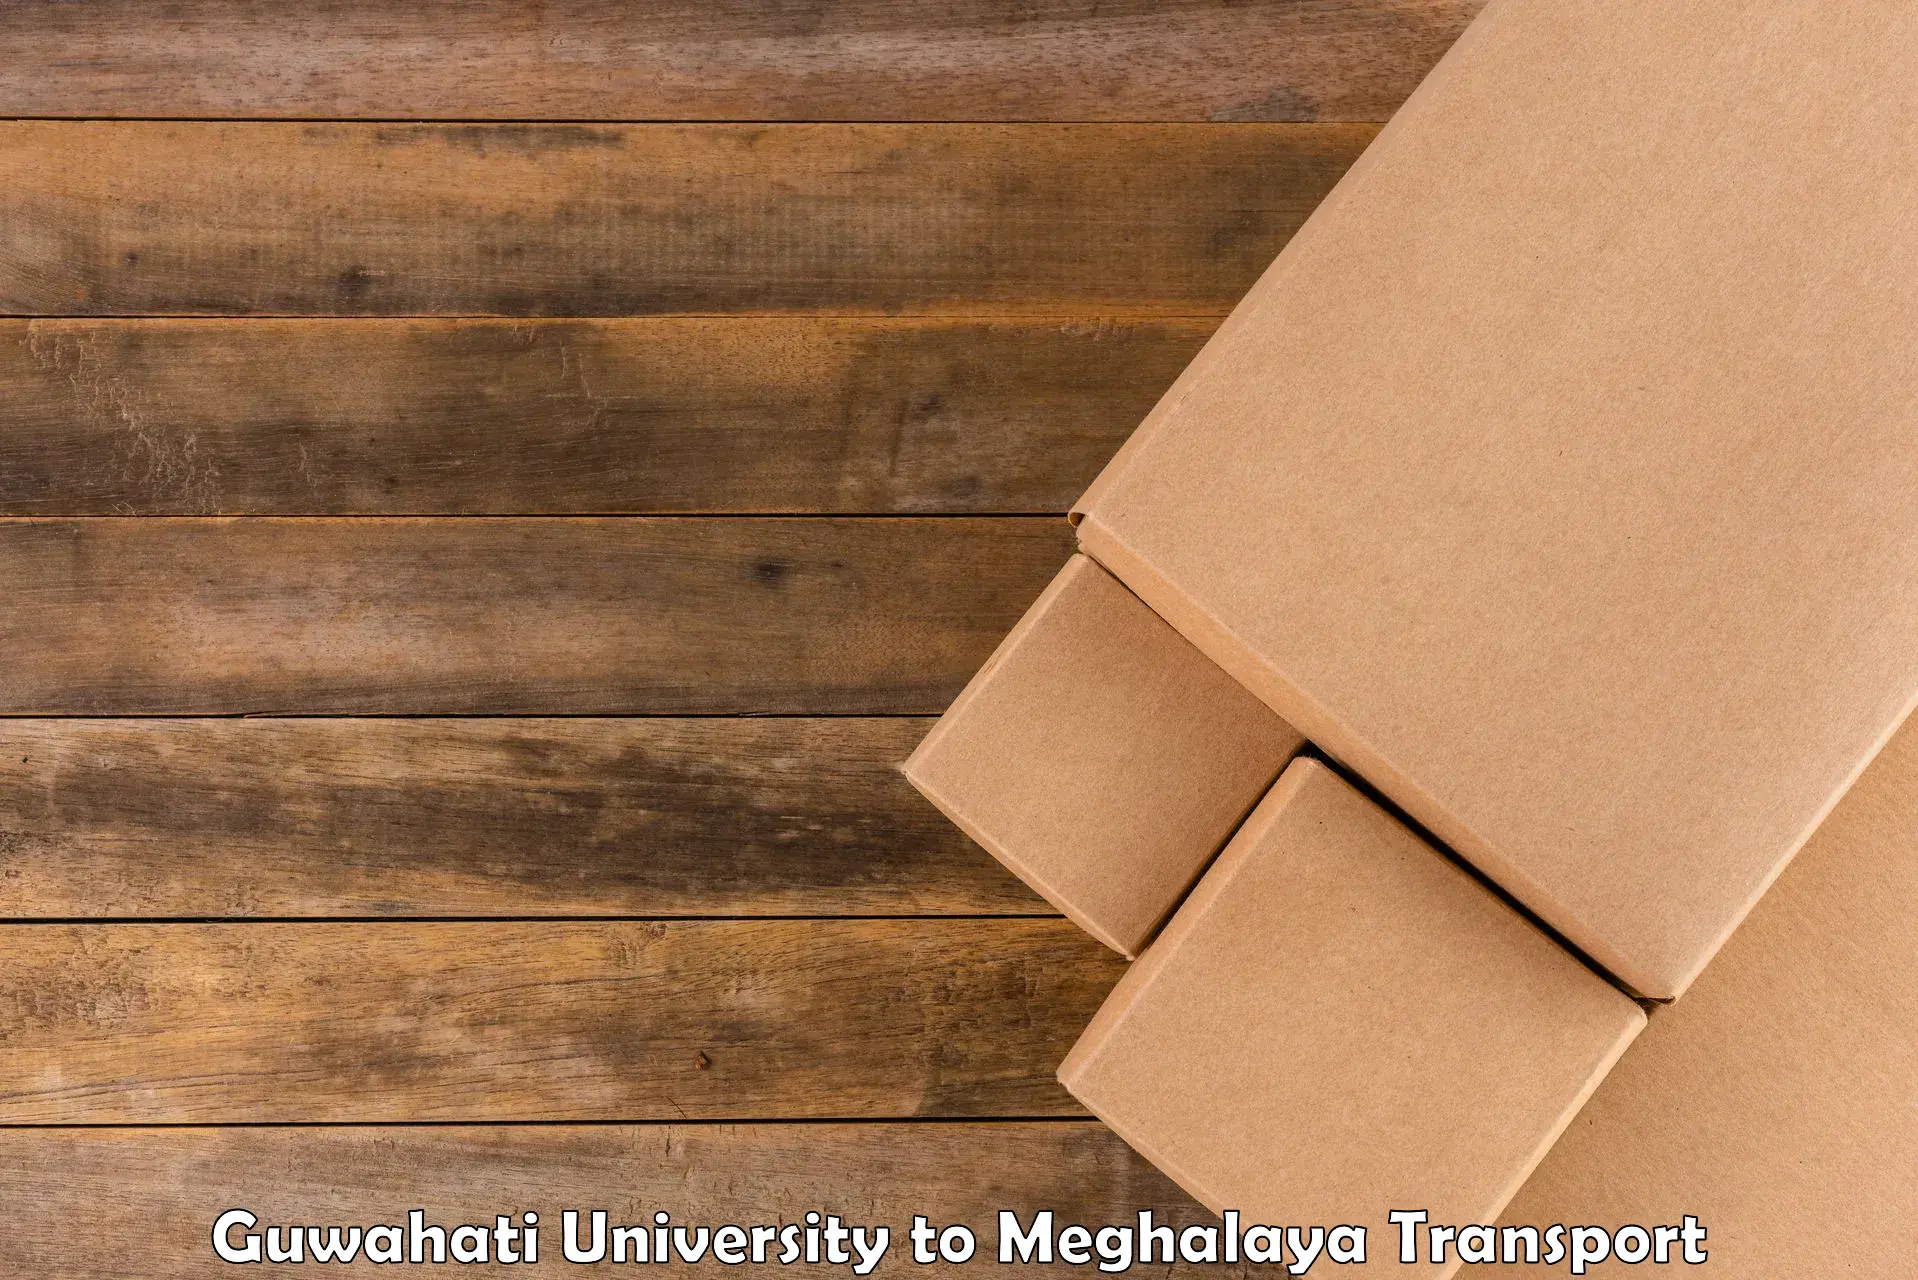 Air freight transport services in Guwahati University to Shillong